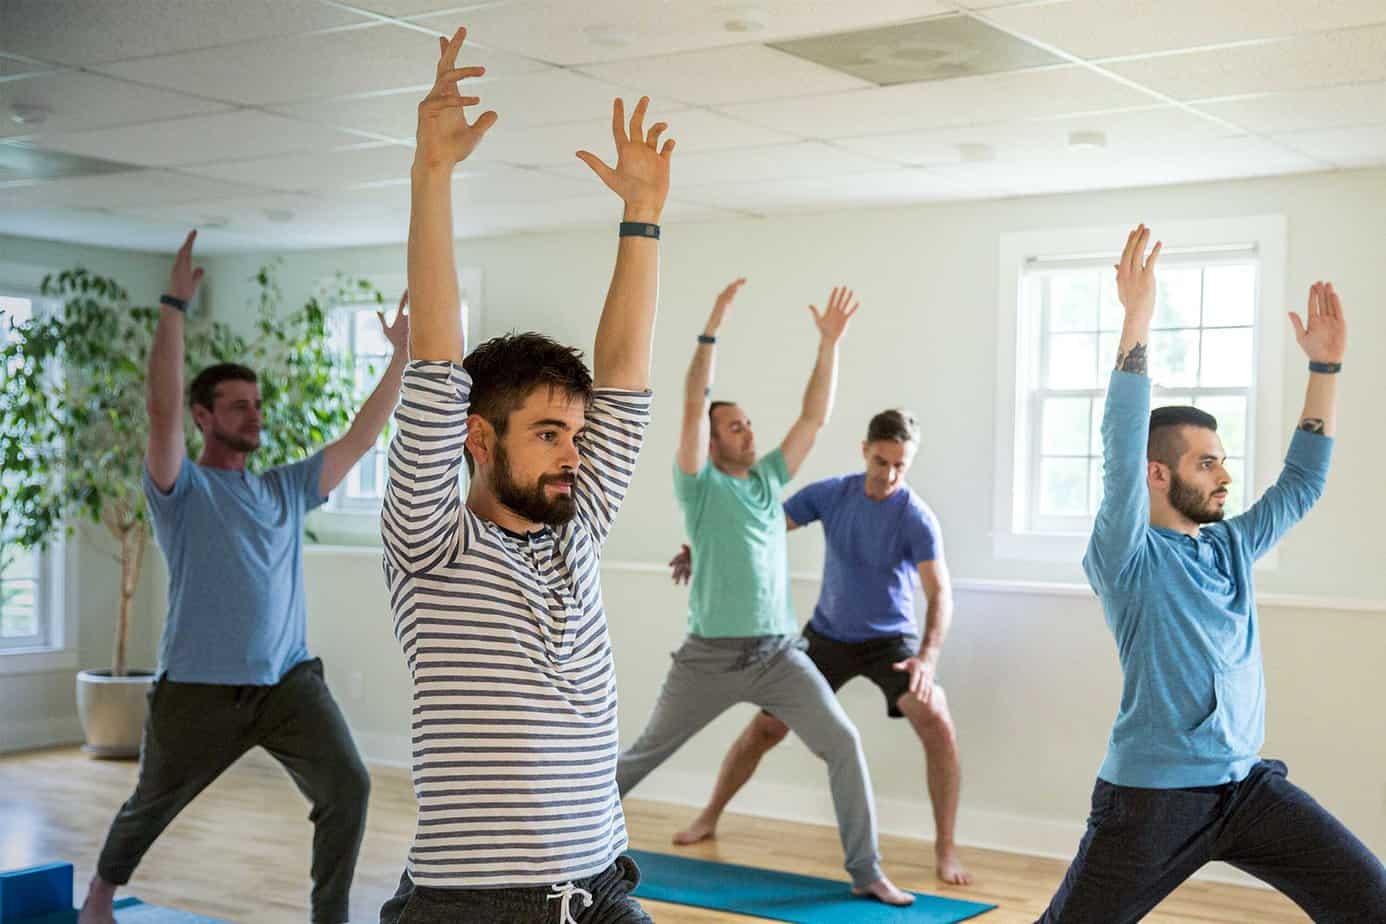 A group of men take a yoga class in bright room at Mountainside treatment center in Connecticut.